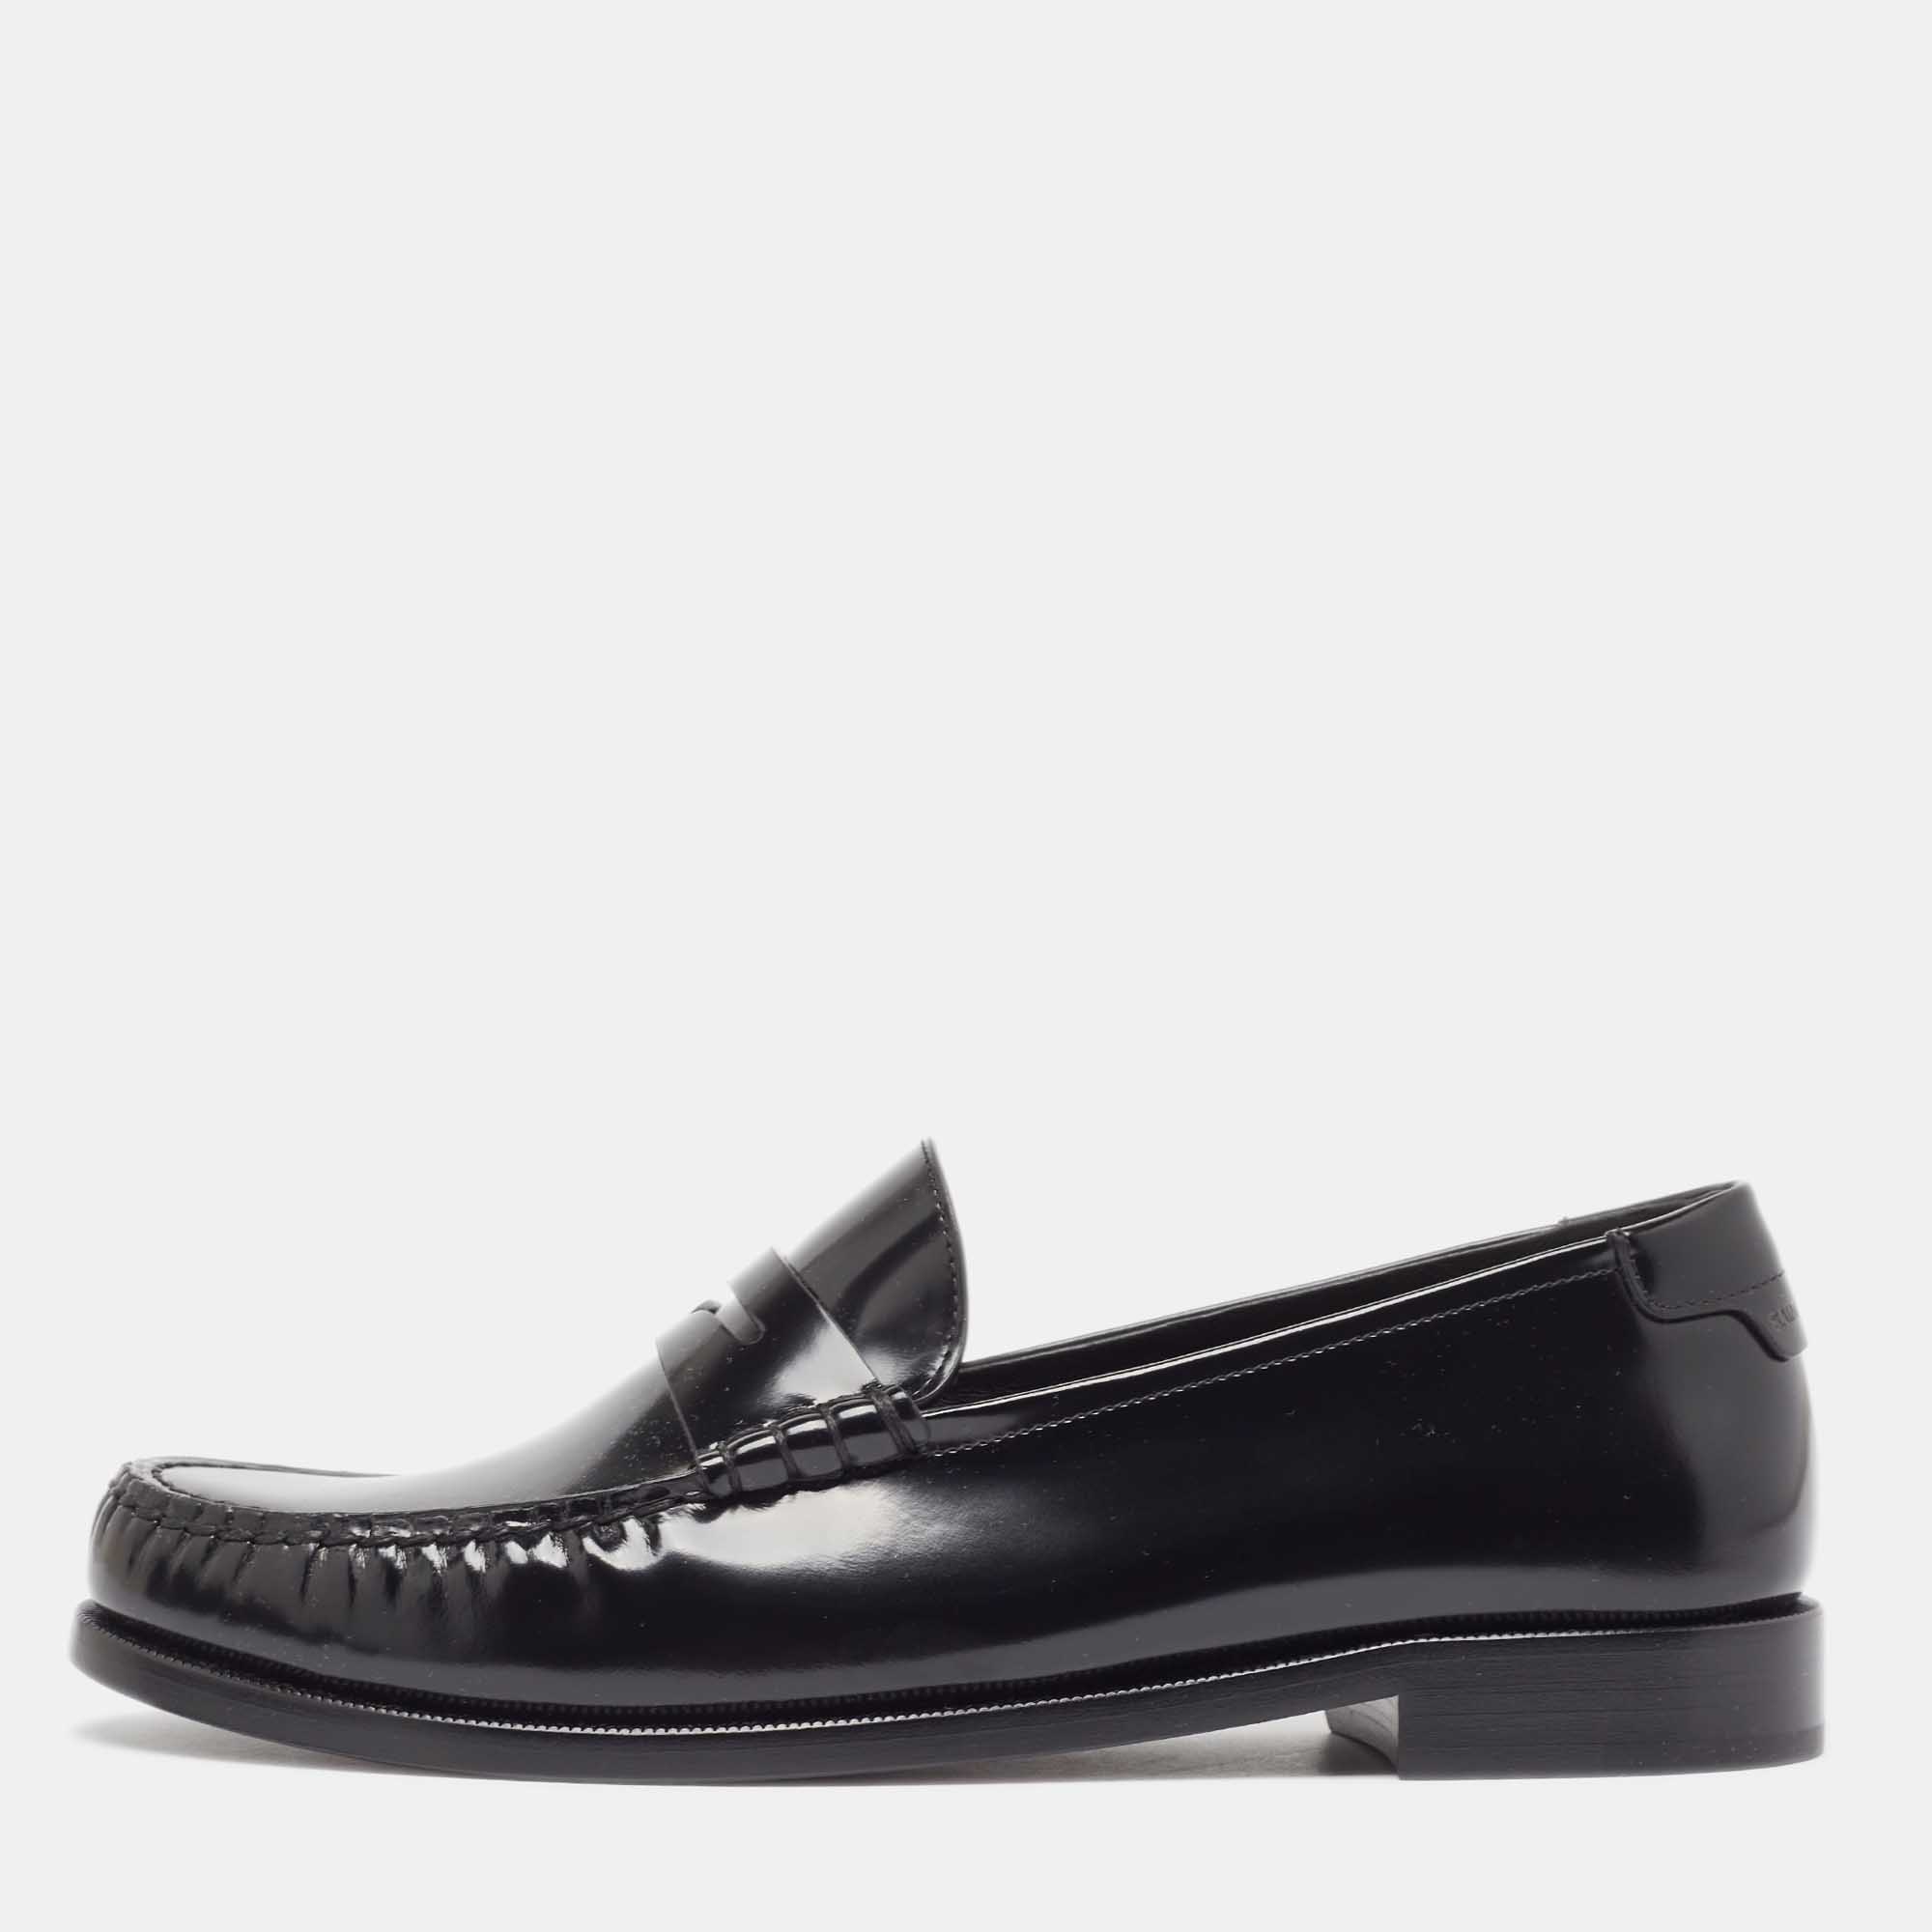 Pre-owned Saint Laurent Black Glossy Leather Penny Loafers Size 41